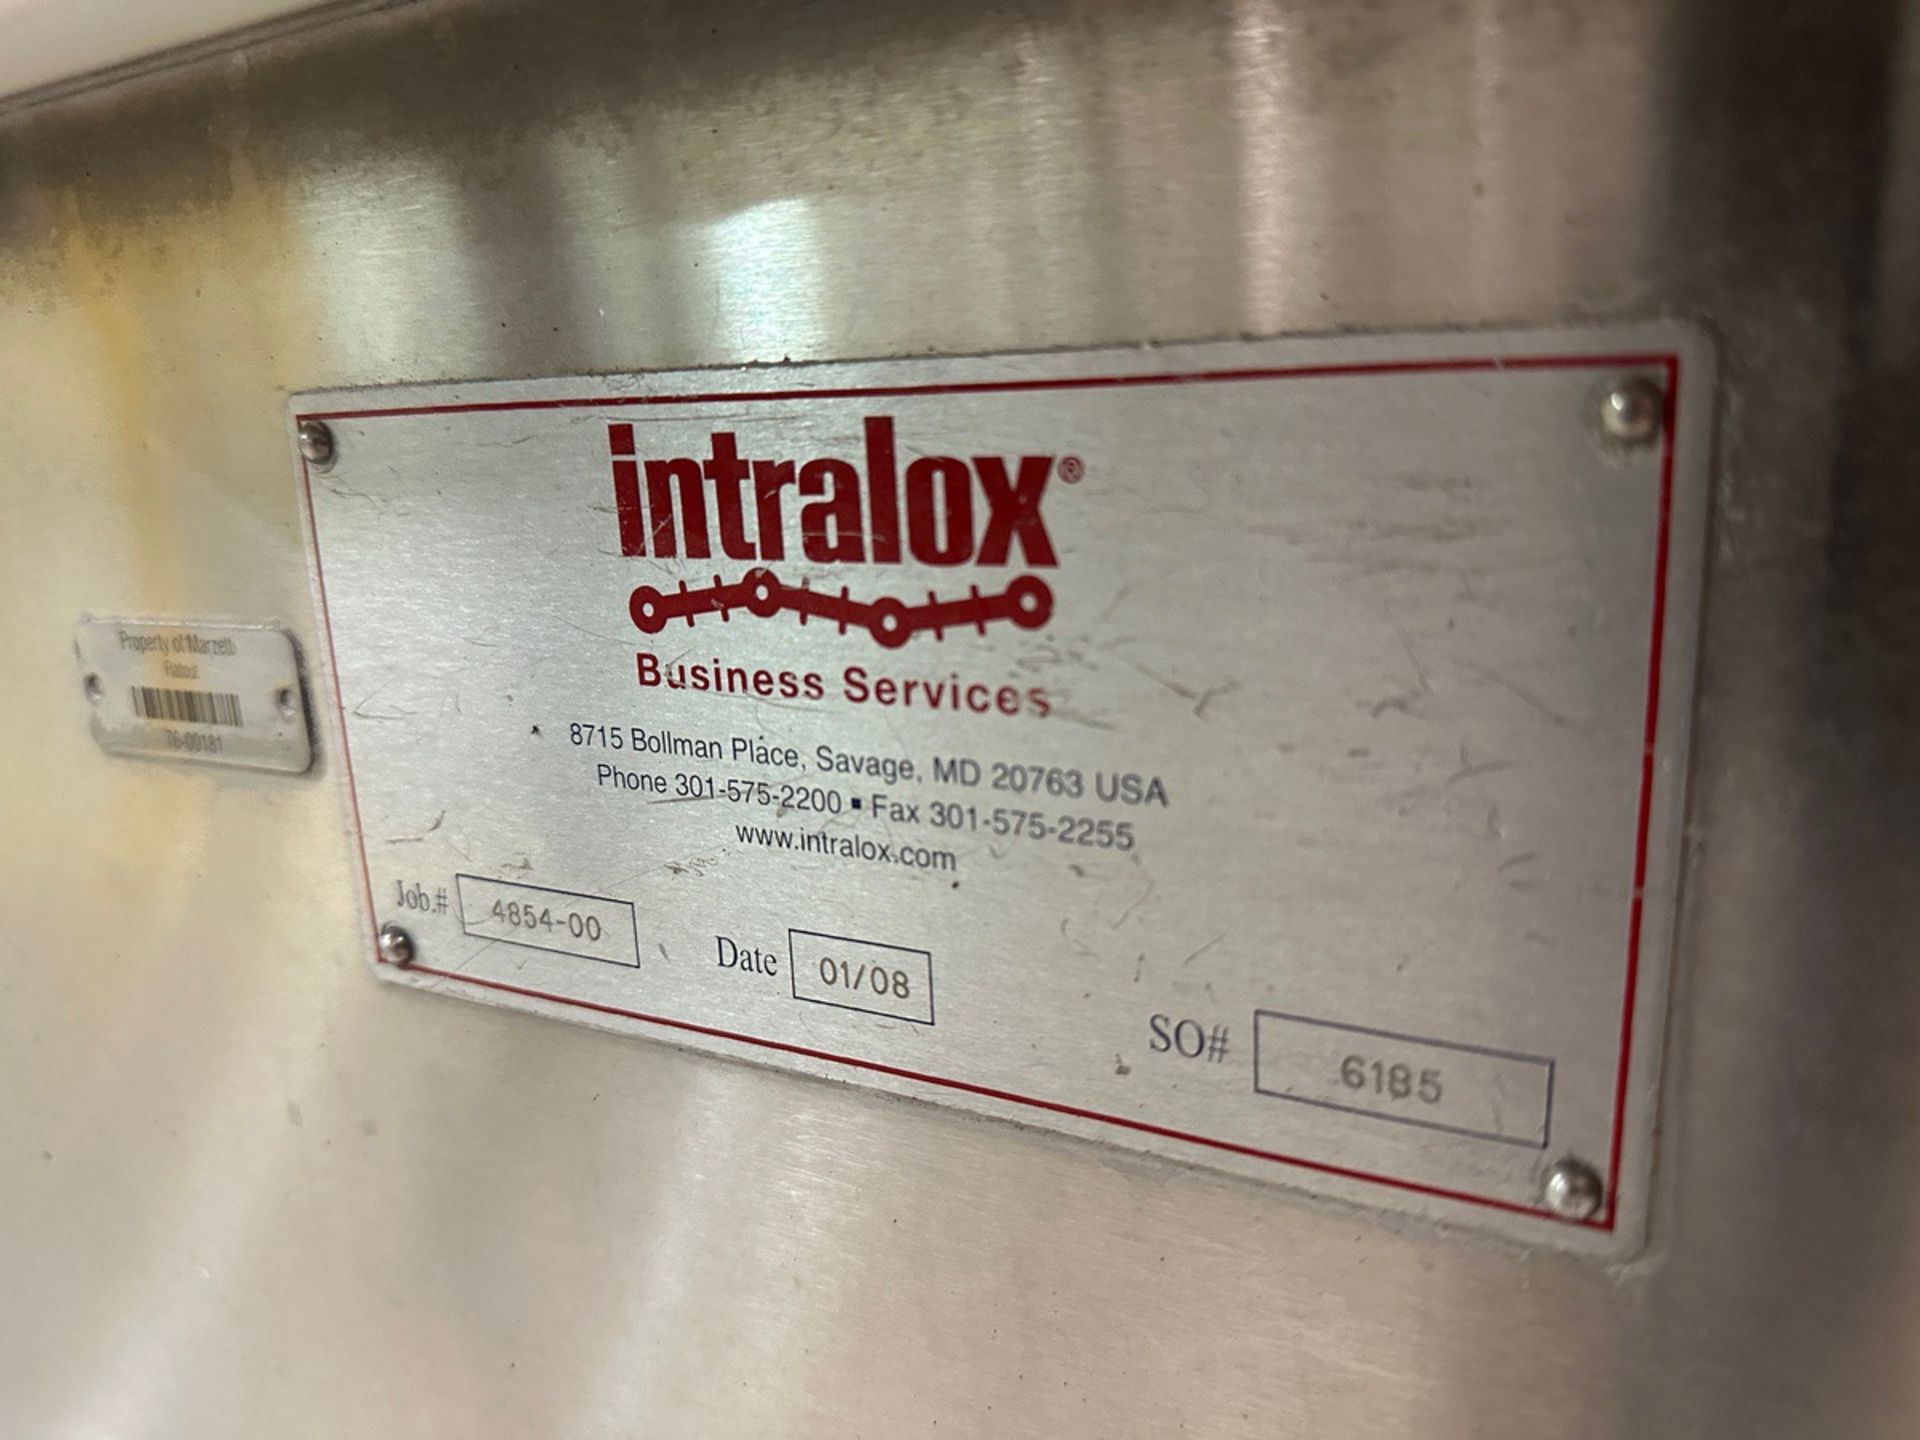 Intralox Multi-Directional Roller Conveyor over Stainless Steel Frame (Approx. 40" | Rig Fee $300 - Image 2 of 2